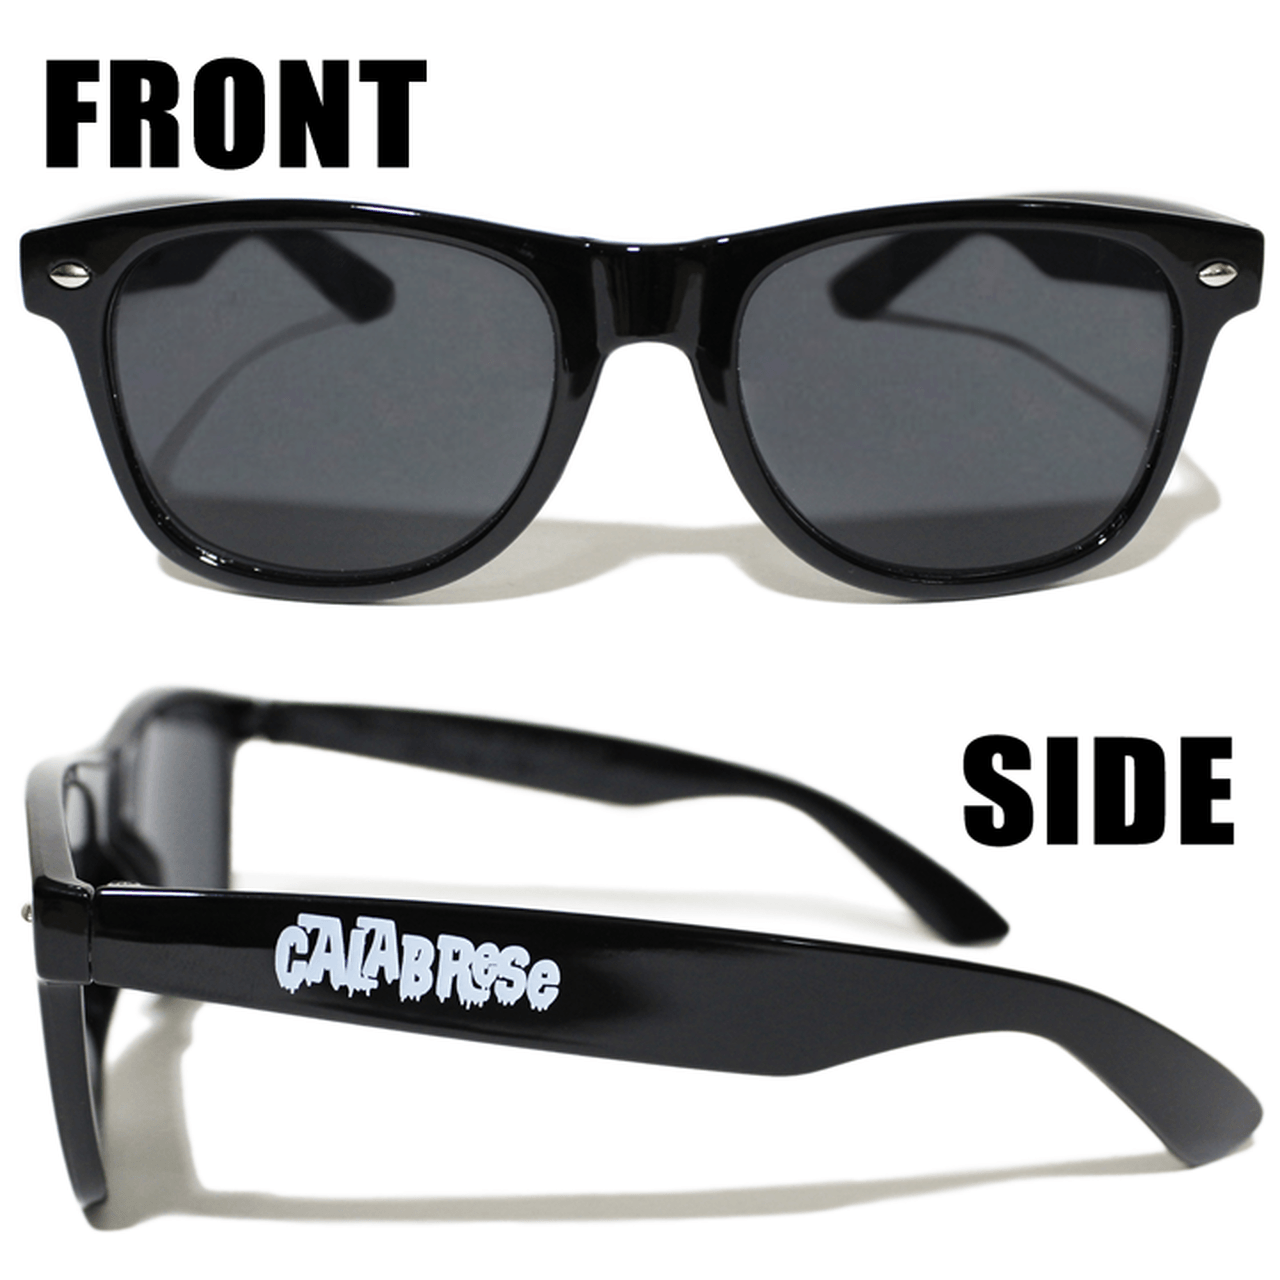 Calabrese Logo - CALABRESE- Blood - Sunglasses